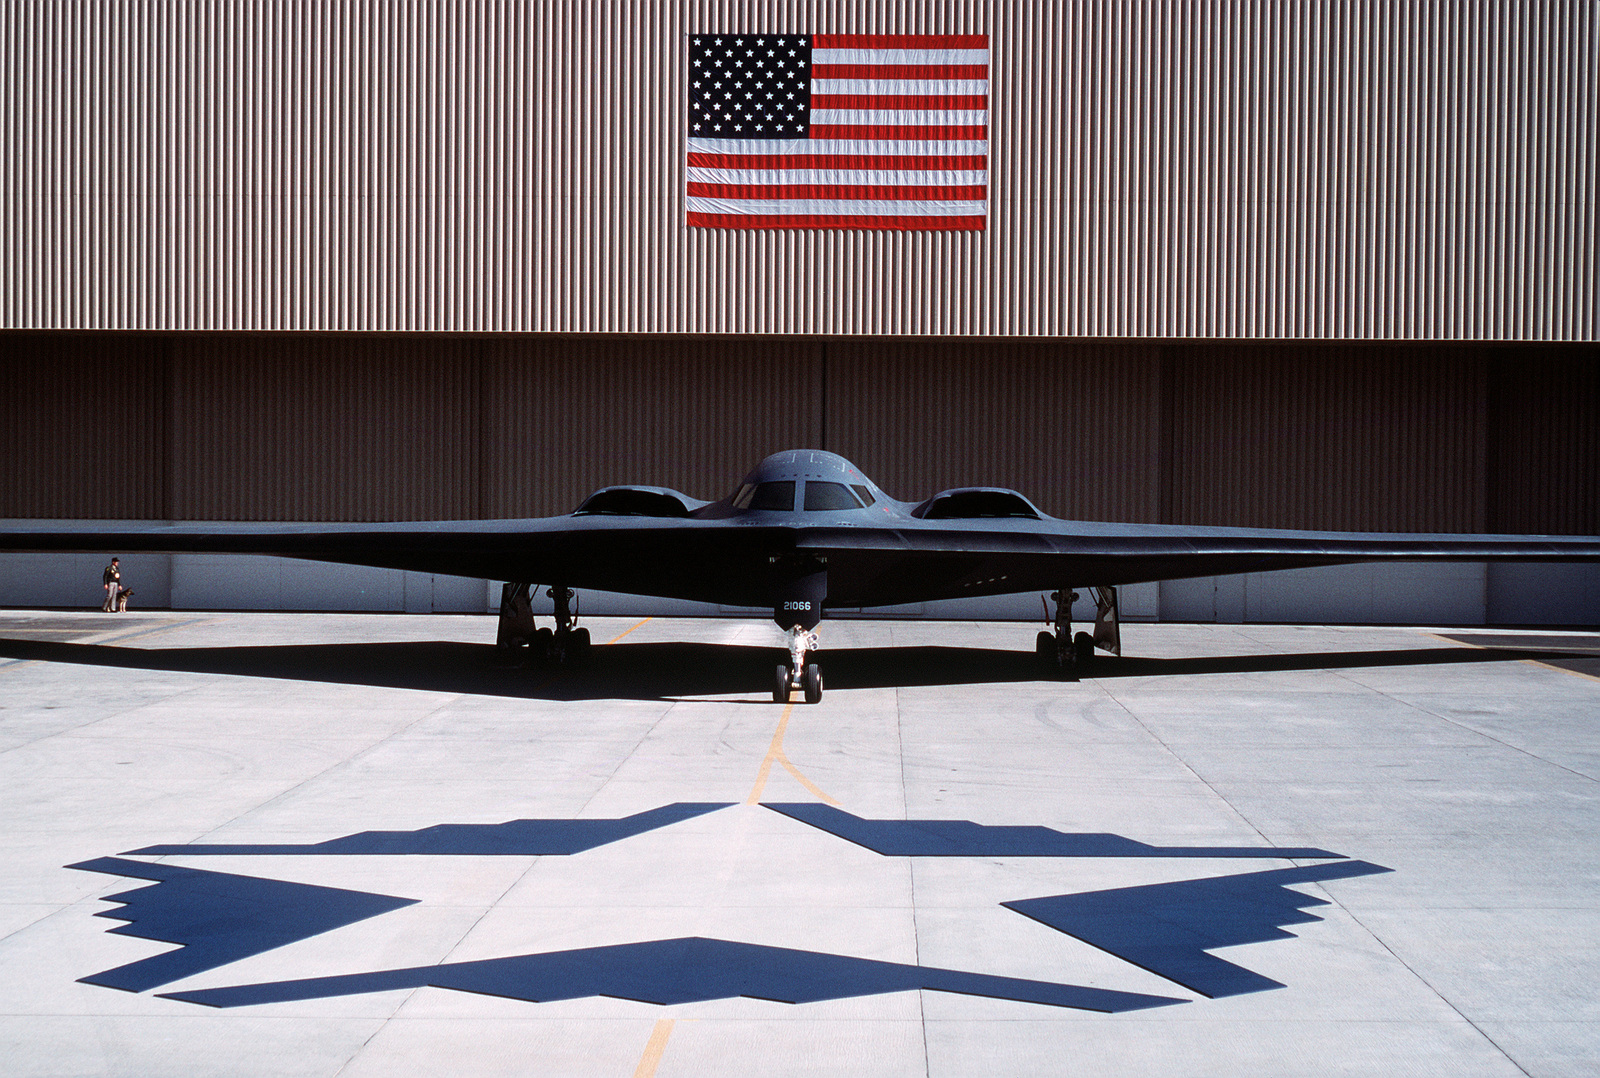 a-front-view-of-the-b-2-advanced-technology-bomber-at-its-rollout-air-force-b99498-1600.jpg